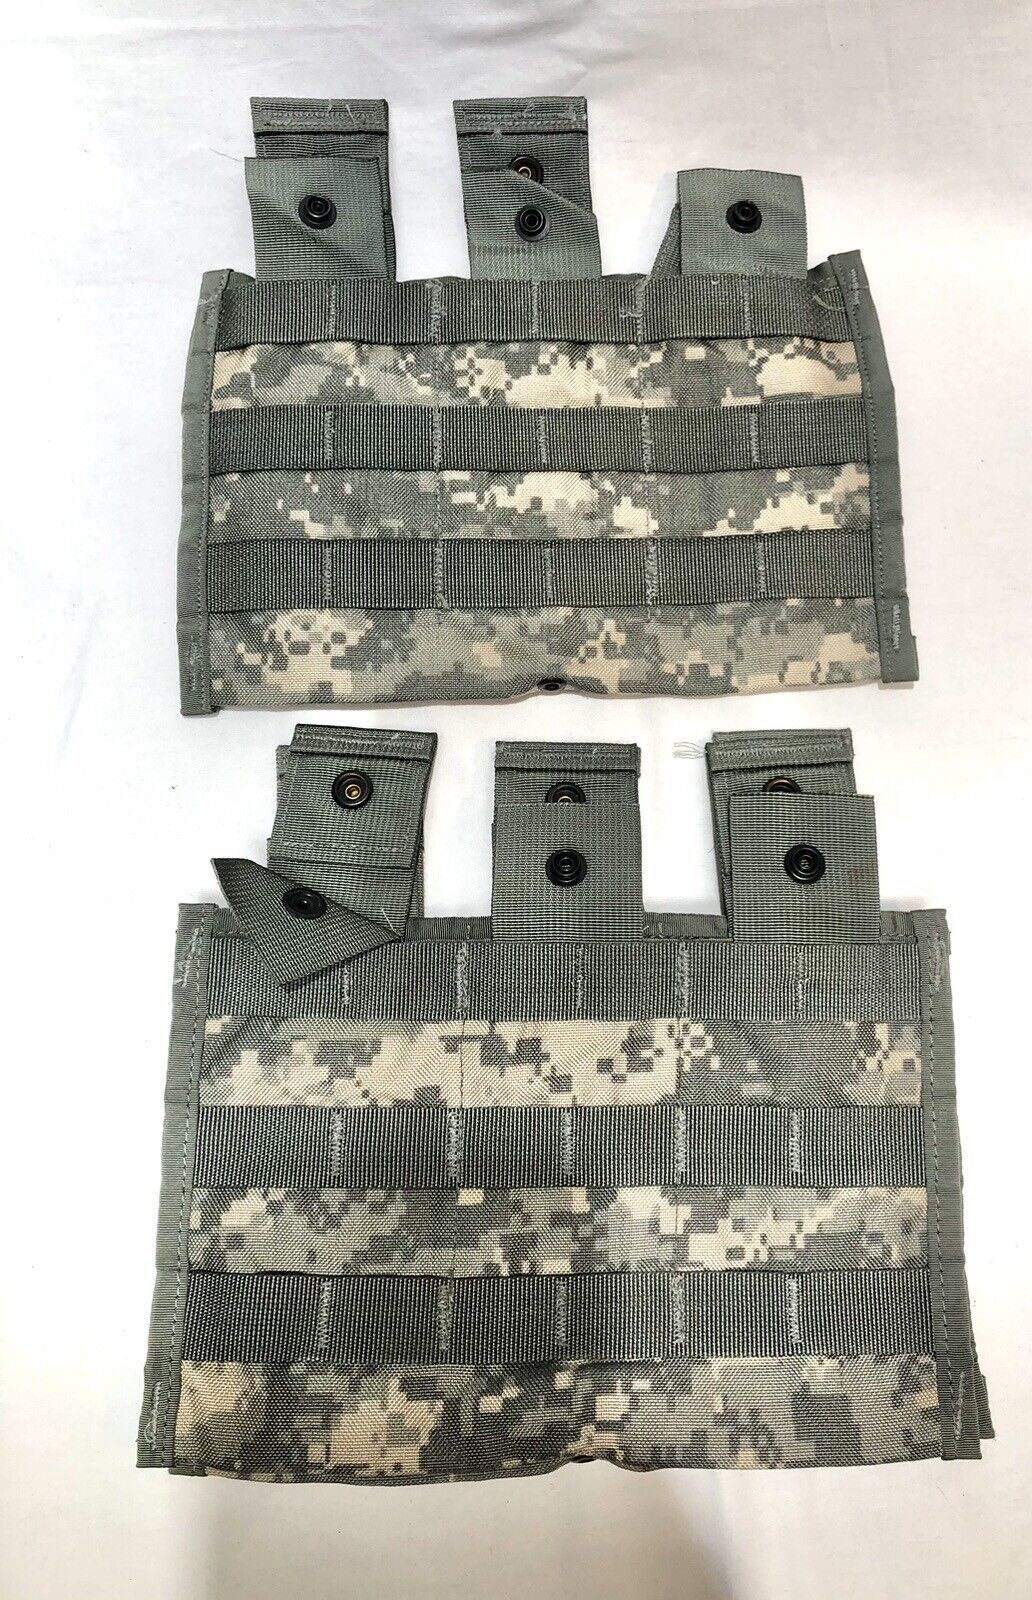 Two US Military Molle Triple Mag Pouch 3 Mag Pouches ACU Camo, 8465-01-525-0598